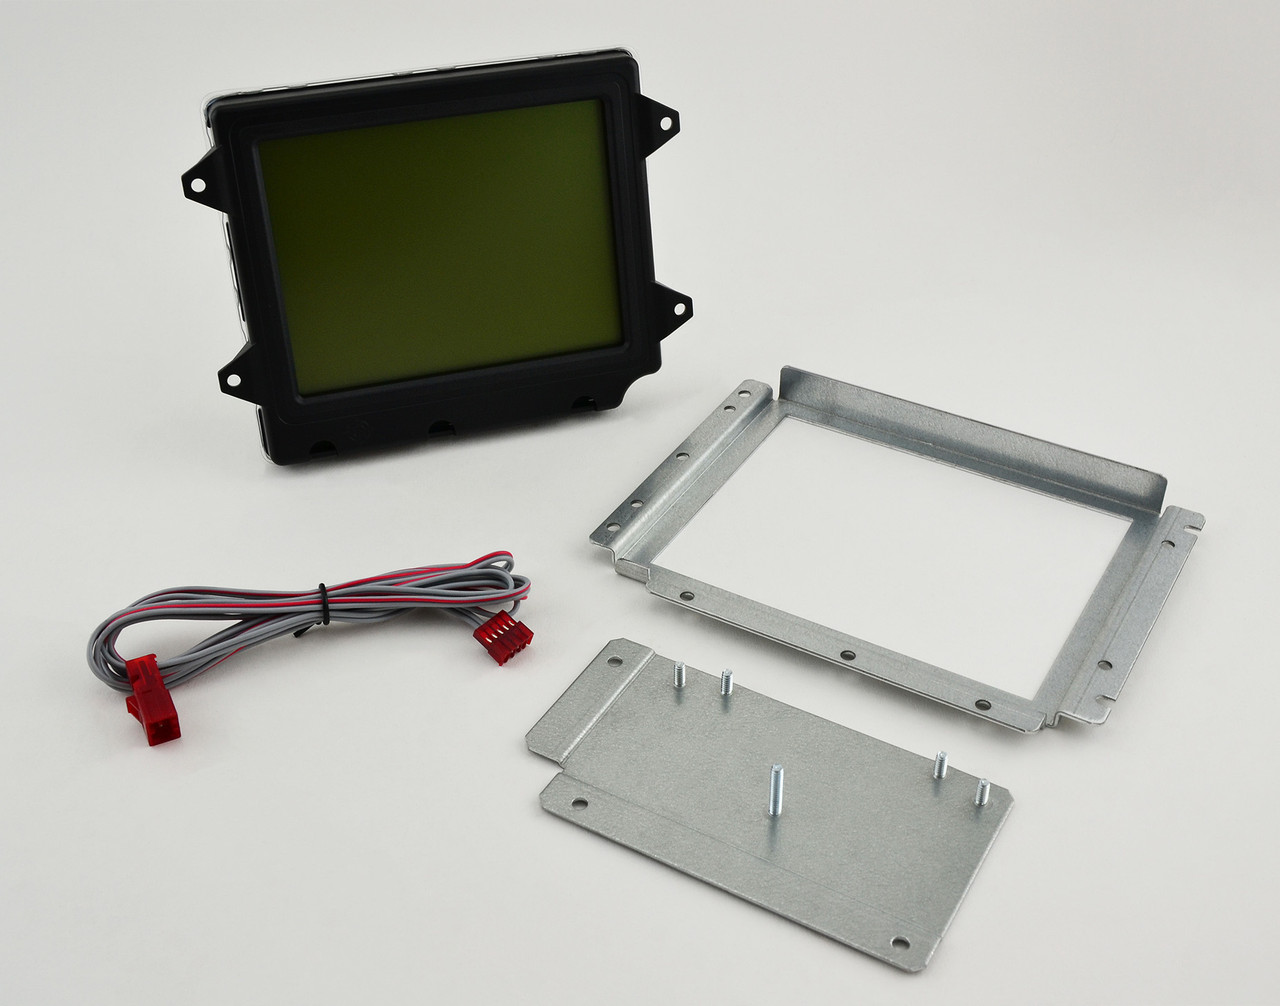 Monochrome QVGA Display And Adapter Kit For Gilbarco® Dispensers. For Encore™, 500, 300 & Advantage™ Dispensers Image